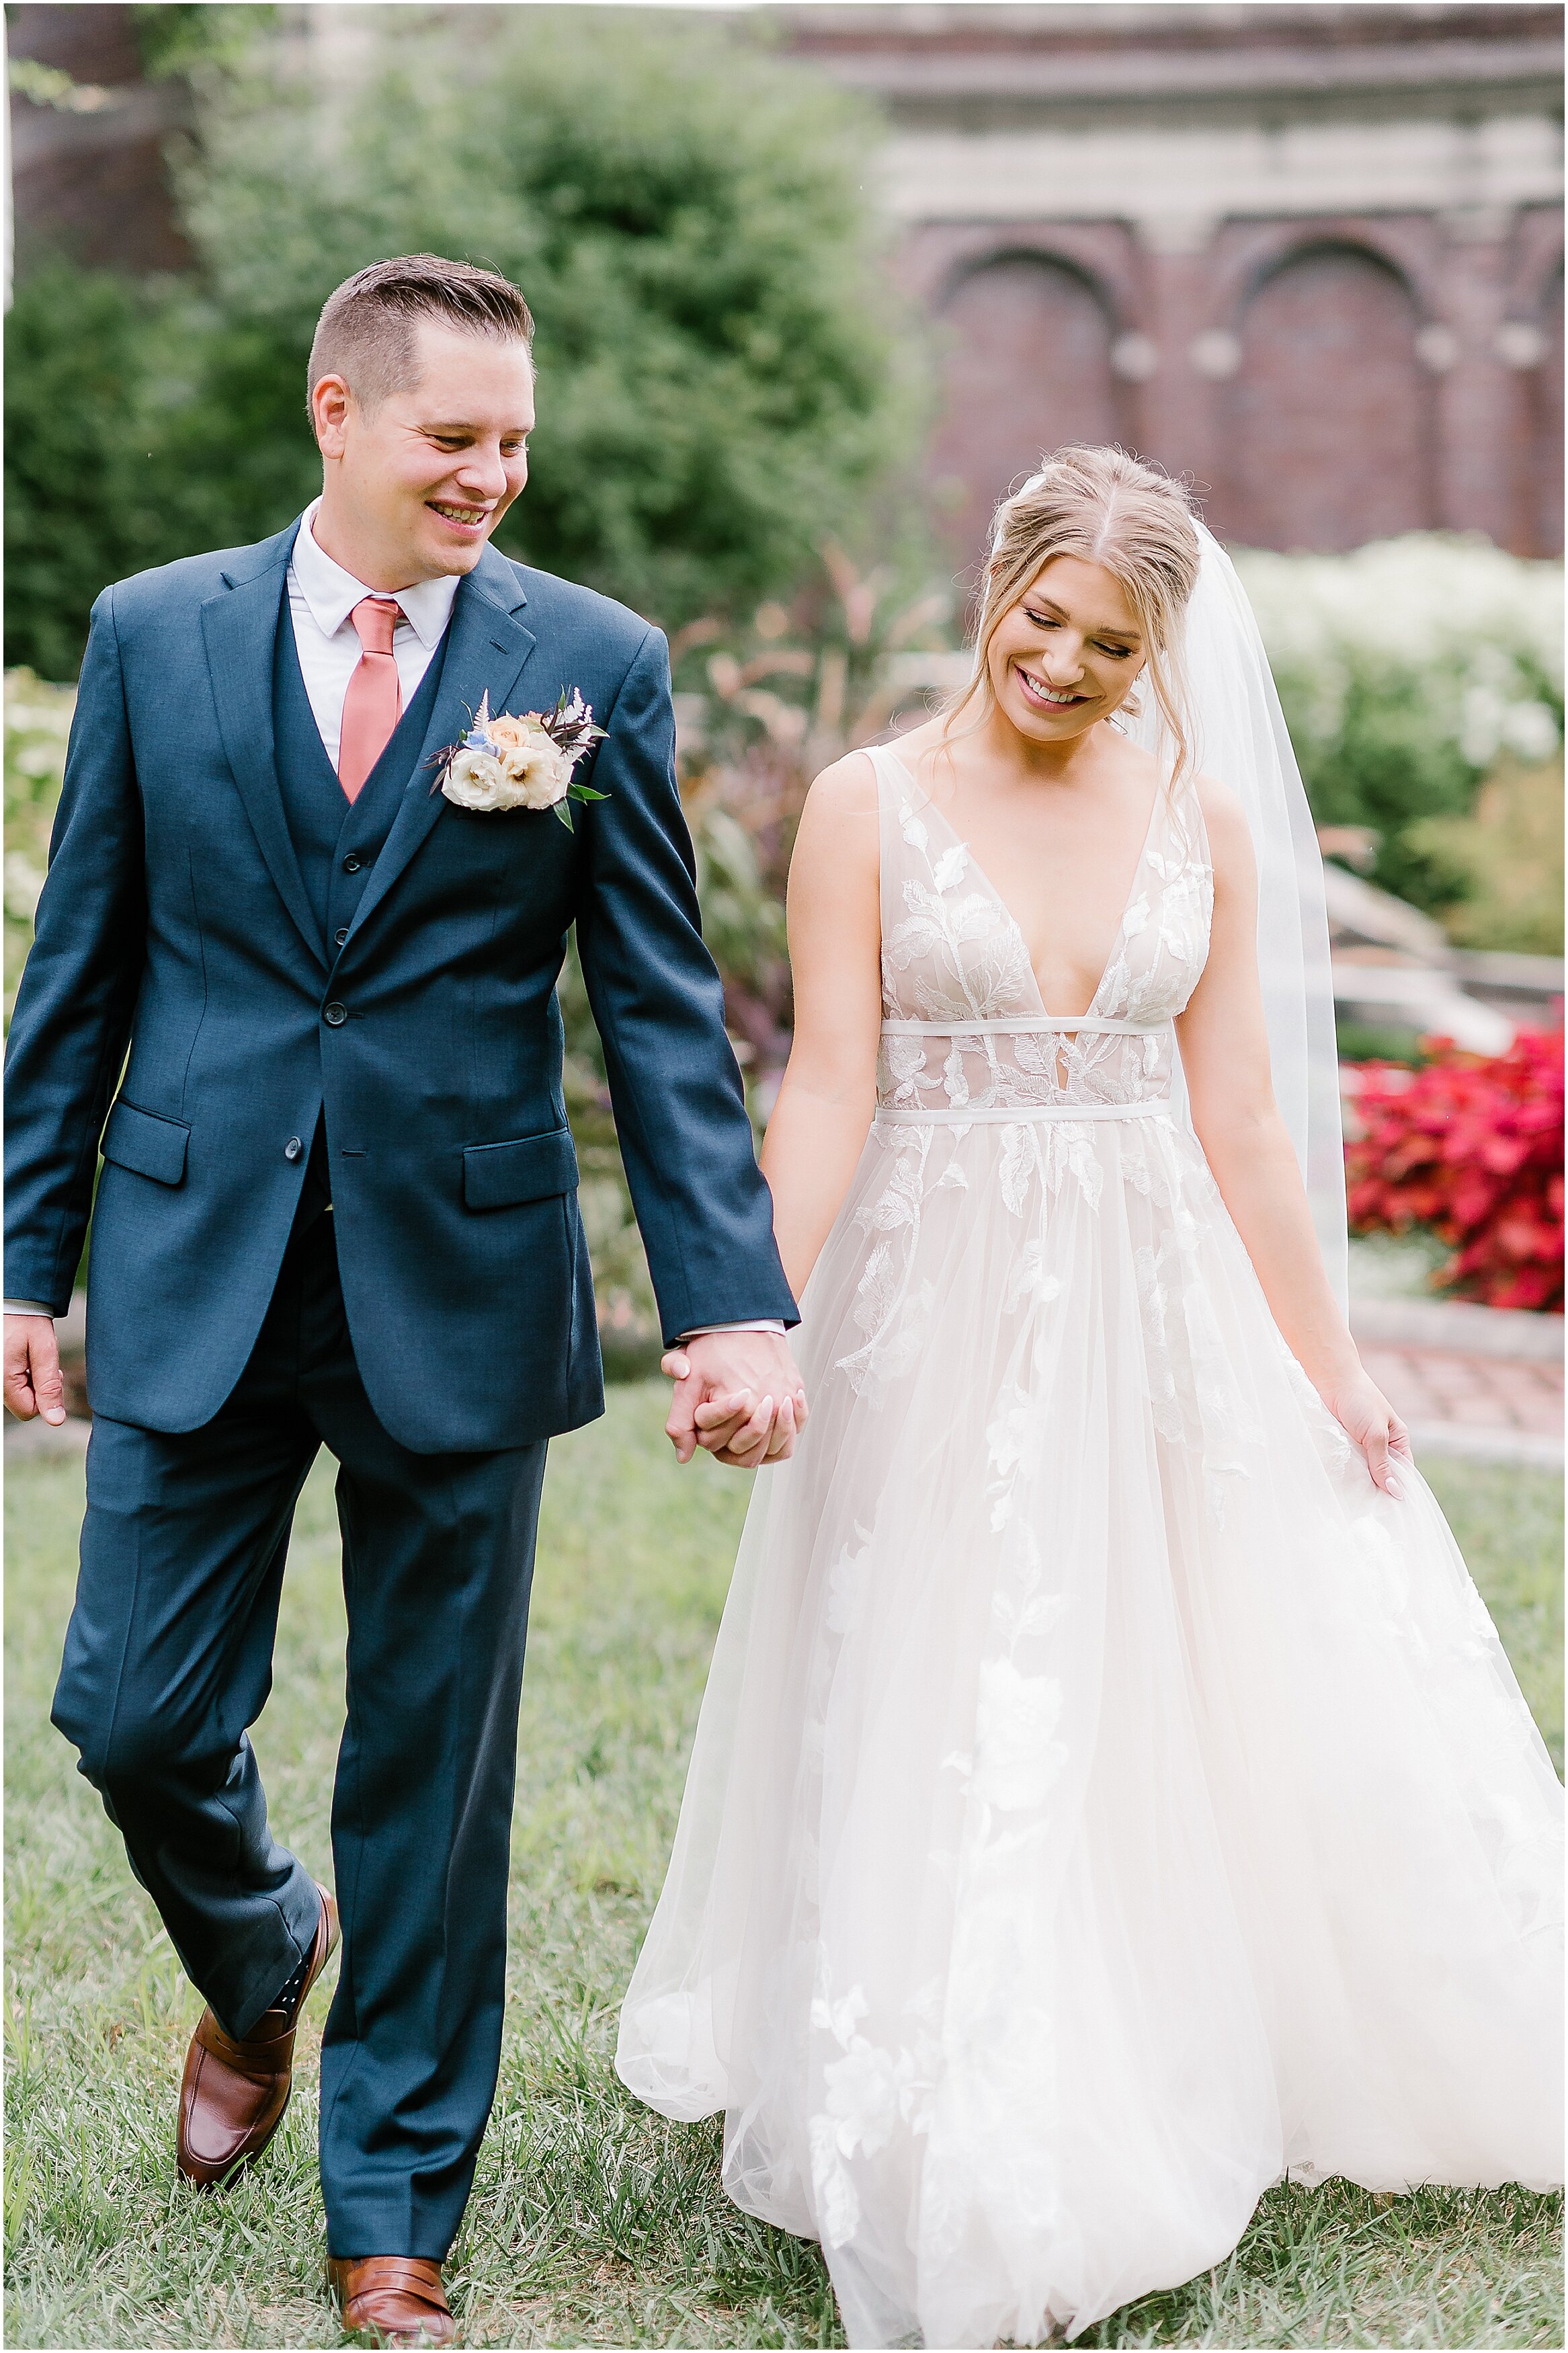 Rebecca Shehorn Photography Colleen and Kyle Inn at Irwin Gardens Wedding-317_The Commons Columbus Inn at Irwin Garden Indianapolis Wedding Photographer.jpg